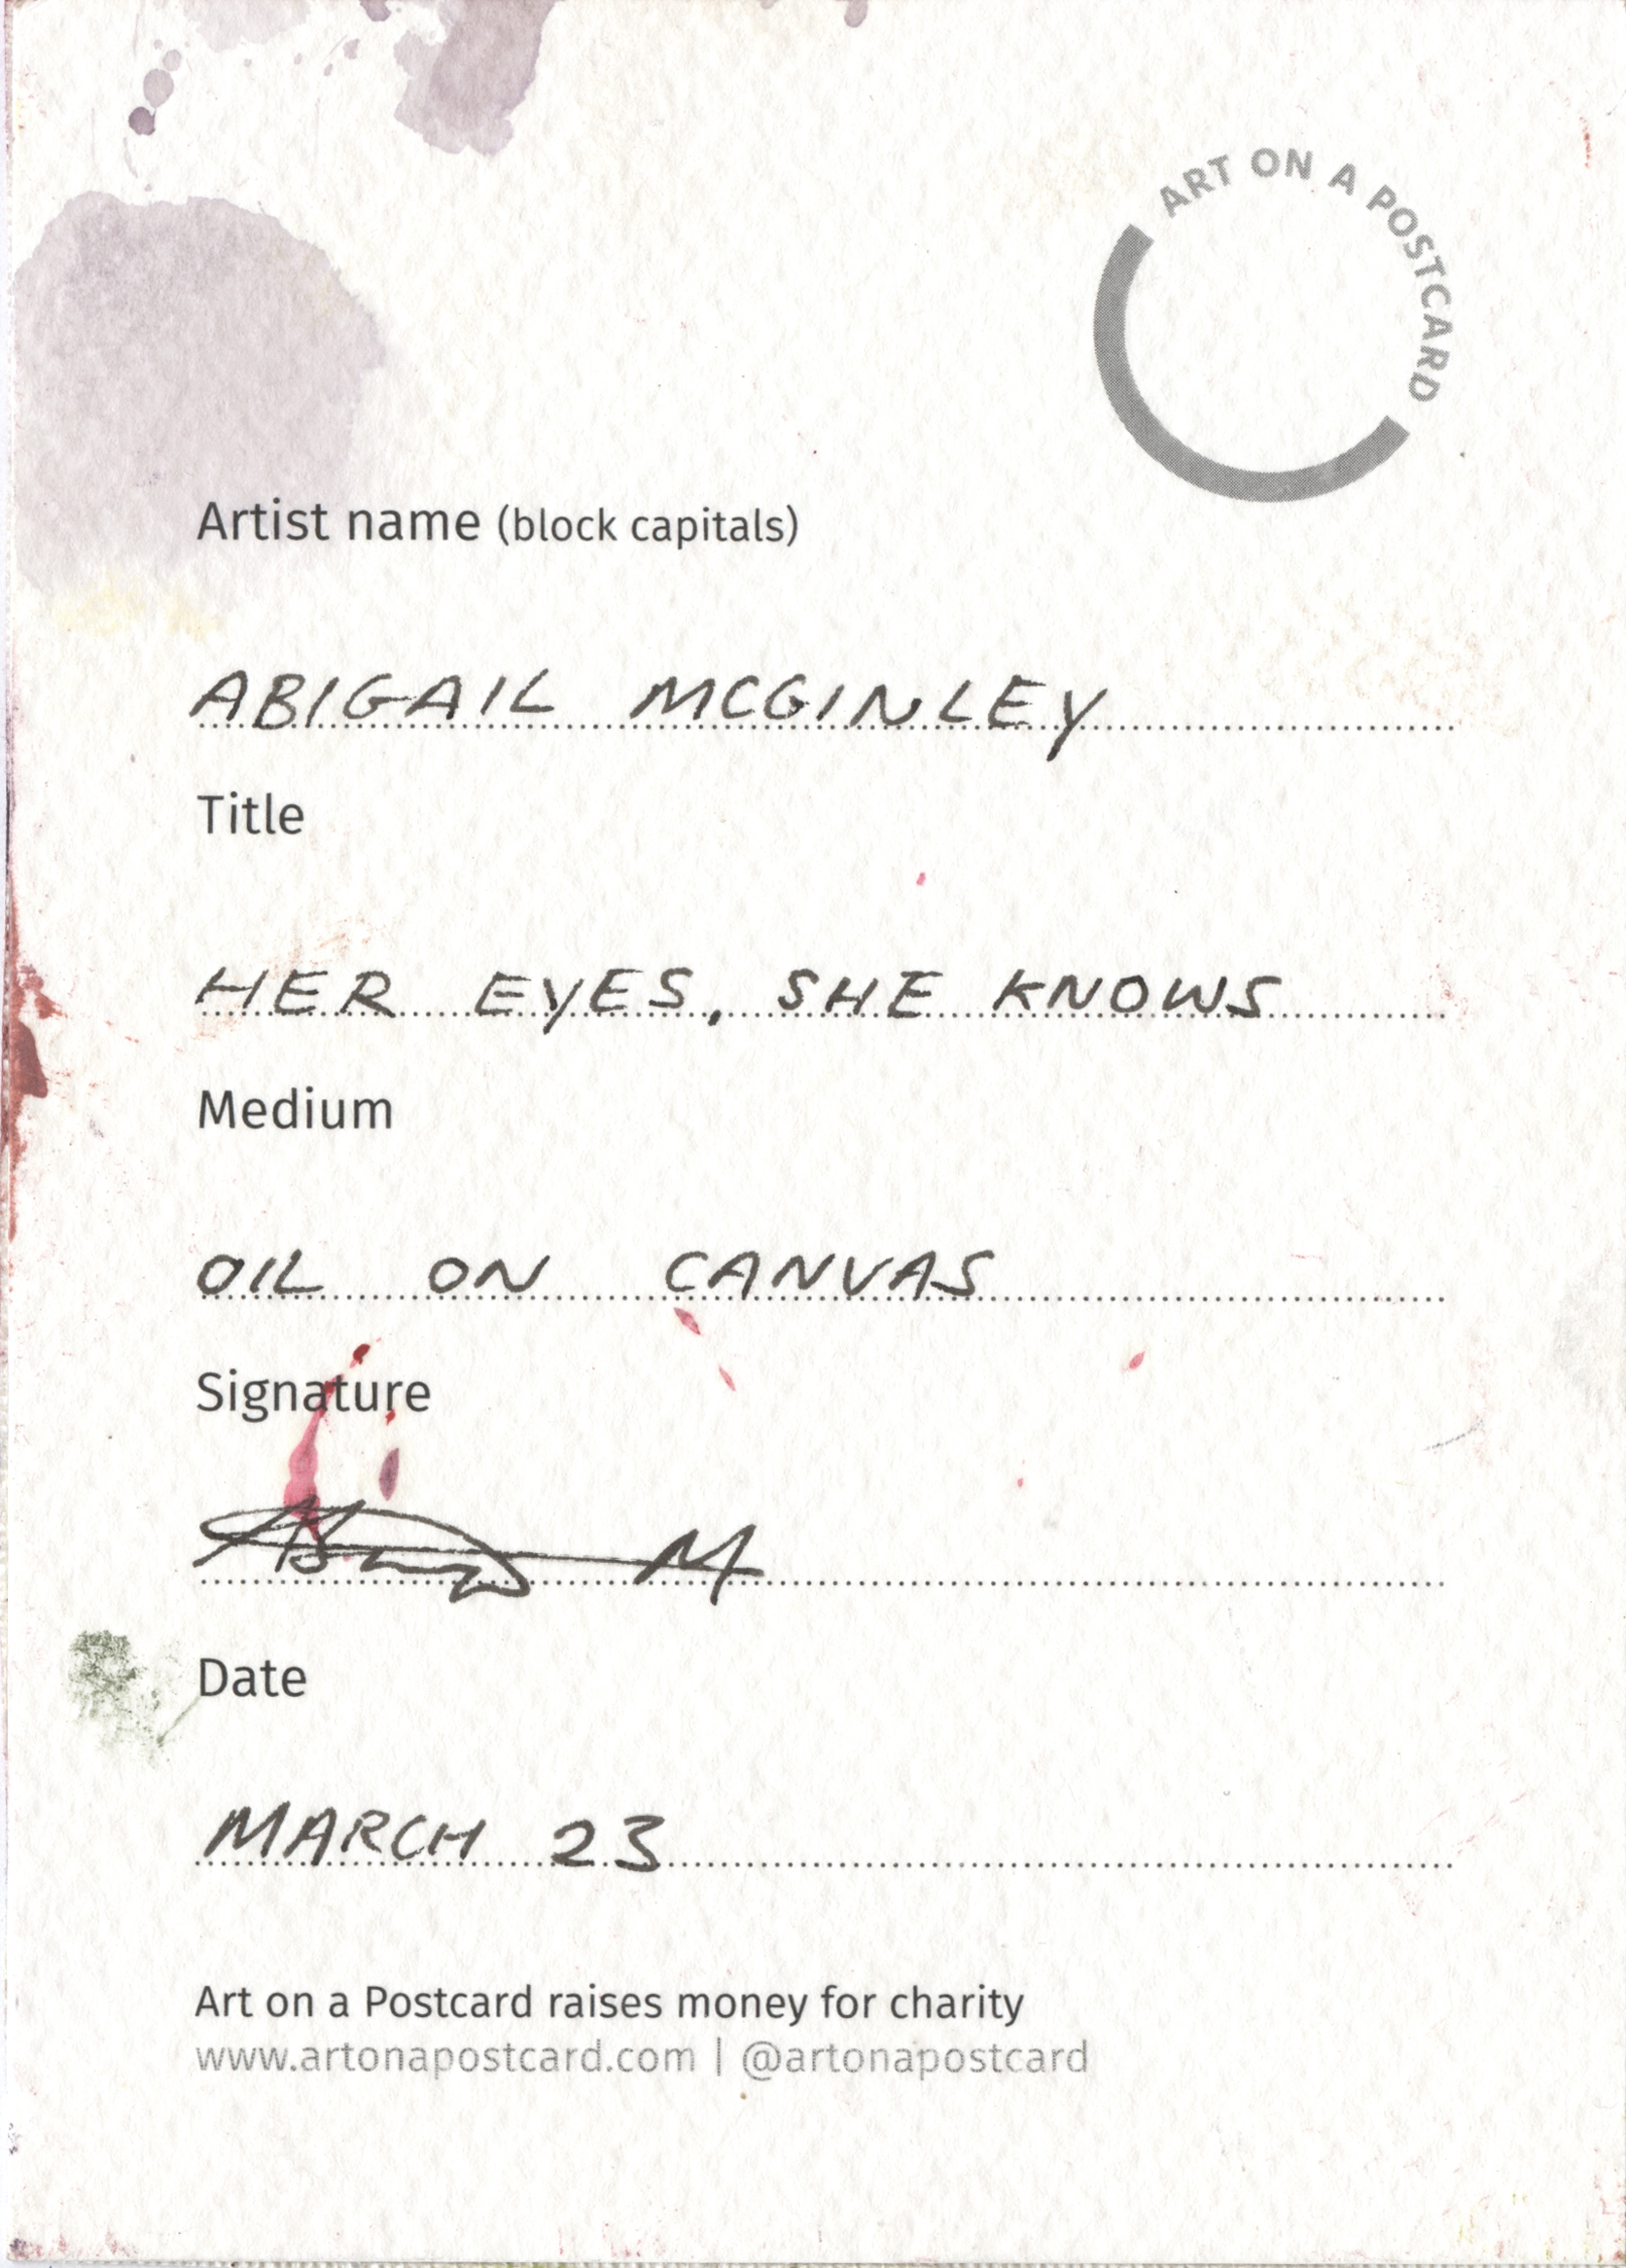 6. Abigail McGinley - Her Eyes, She Knows BACK